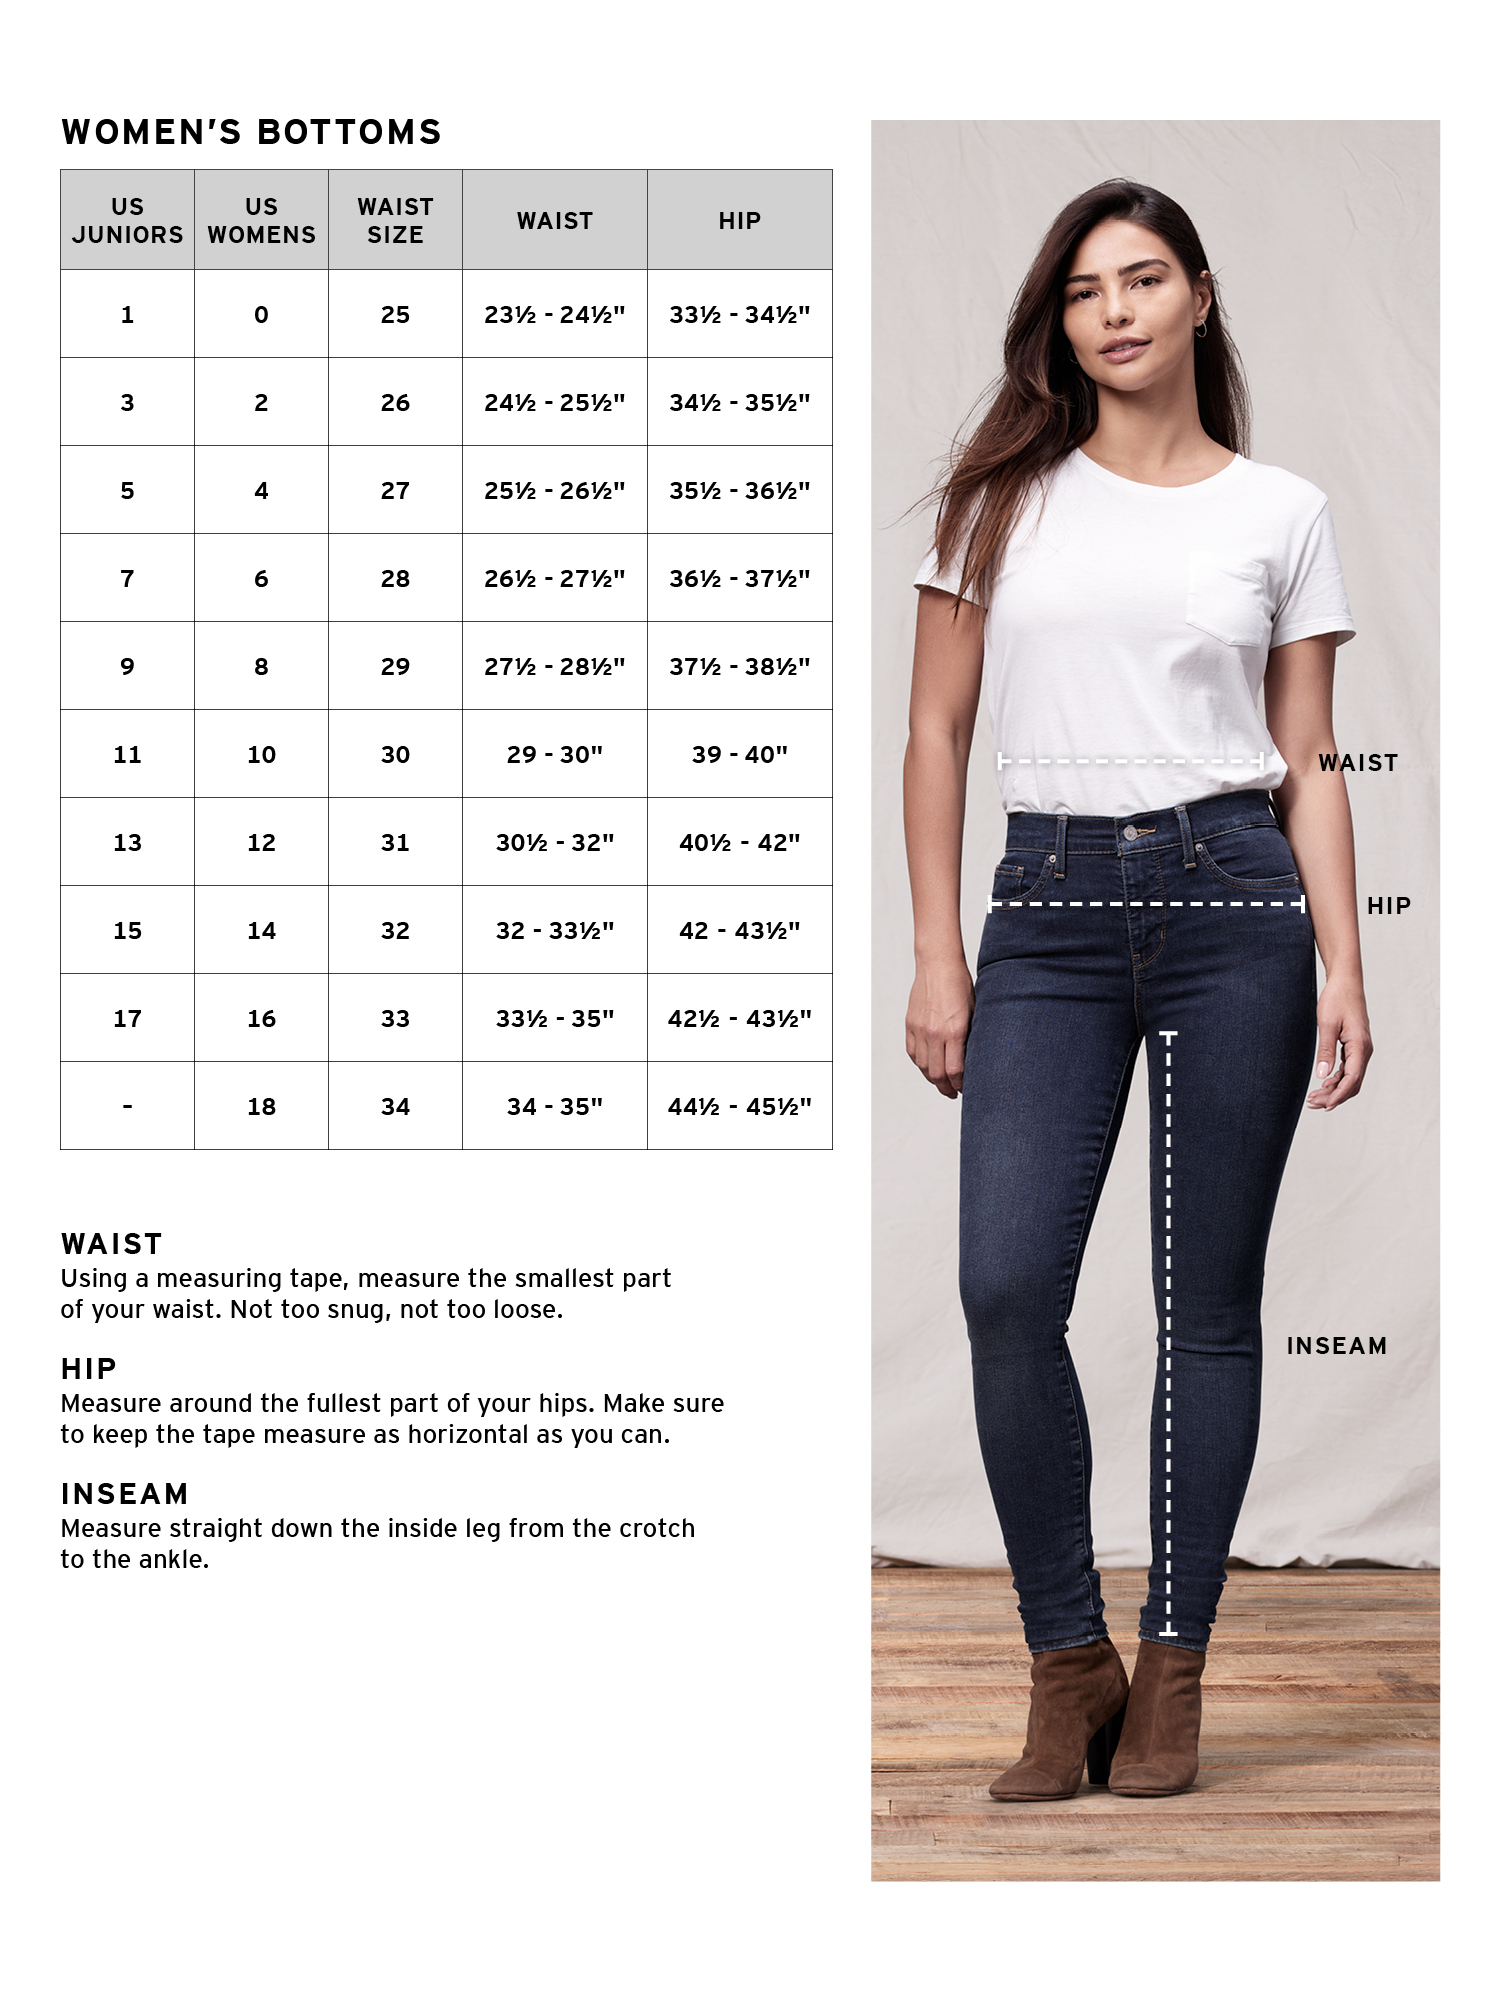 Levi’s Original Red Tab Women's Classic Straight Fit Jeans - image 2 of 7